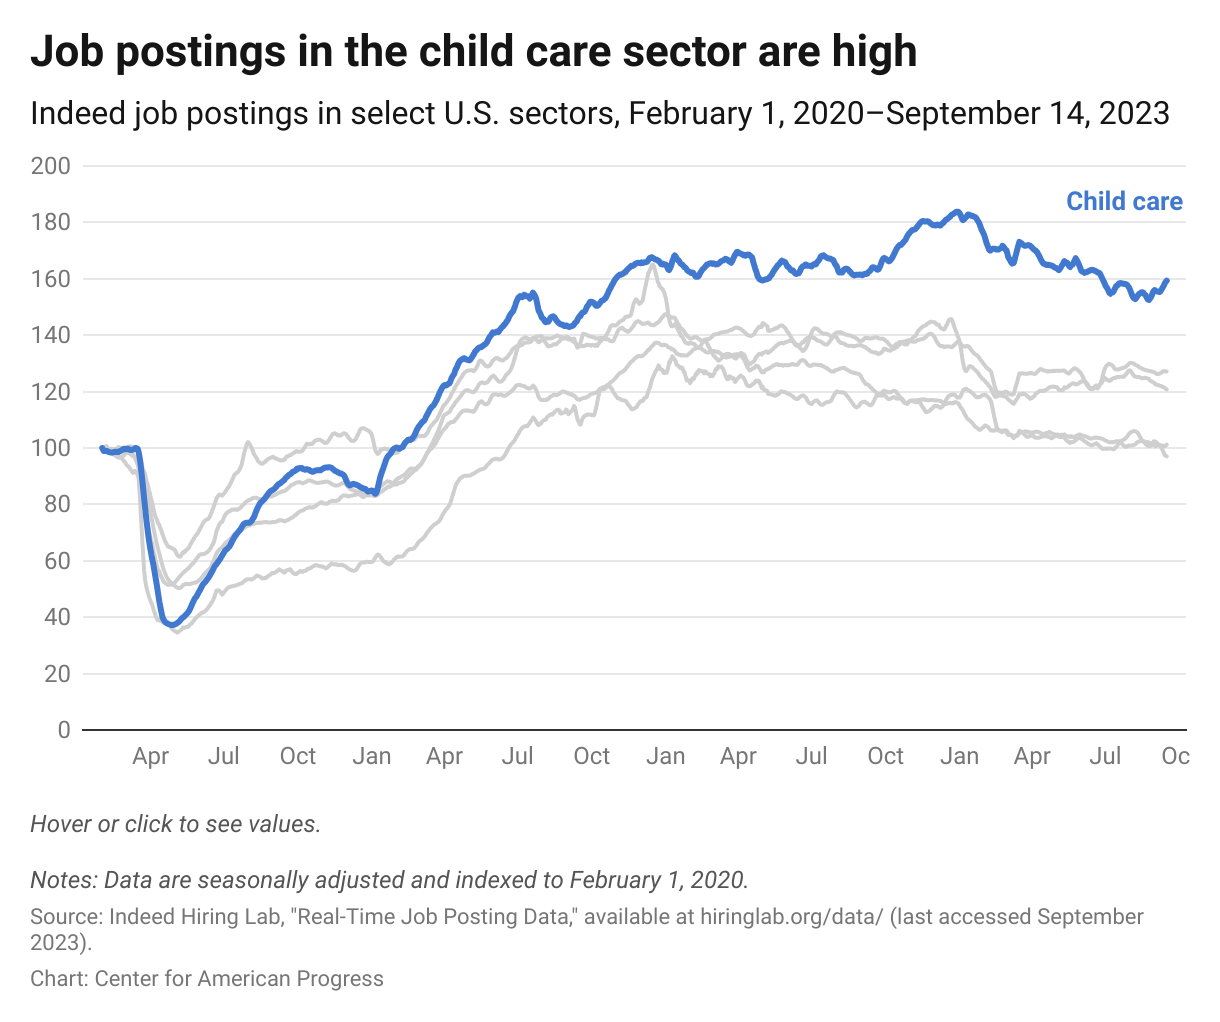 Job postings in the child care sector are above pre-pandemic levels. 